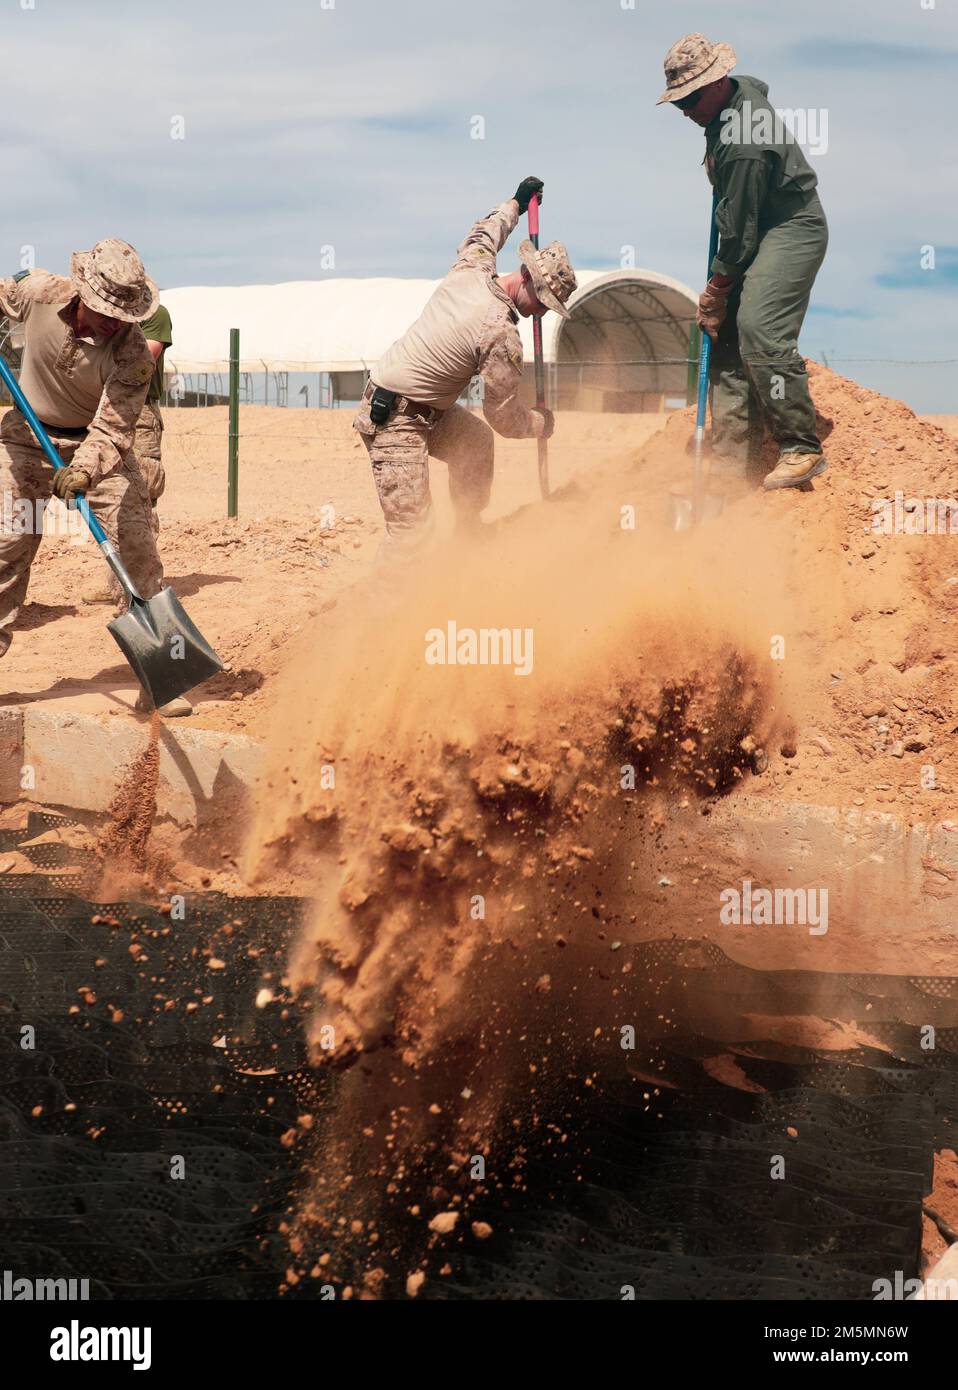 U.S. Marines assigned to Aviation Ground Support, Marine Aviation Weapons and Tactics Squadron One (MAWTS-1), shovel gravel during an airfield damage repair (ADR) exercise at Cannon Air Defense Complex, in Yuma, Arizona, March 26, 2022.  WTI is a seven-week training event hosted by MAWTS-1, providing standardized advanced tactical training and certification of unit instructor qualifications to support Marine aviation training and readiness, and assists in developing and employing aviation weapons and tactics. Stock Photo